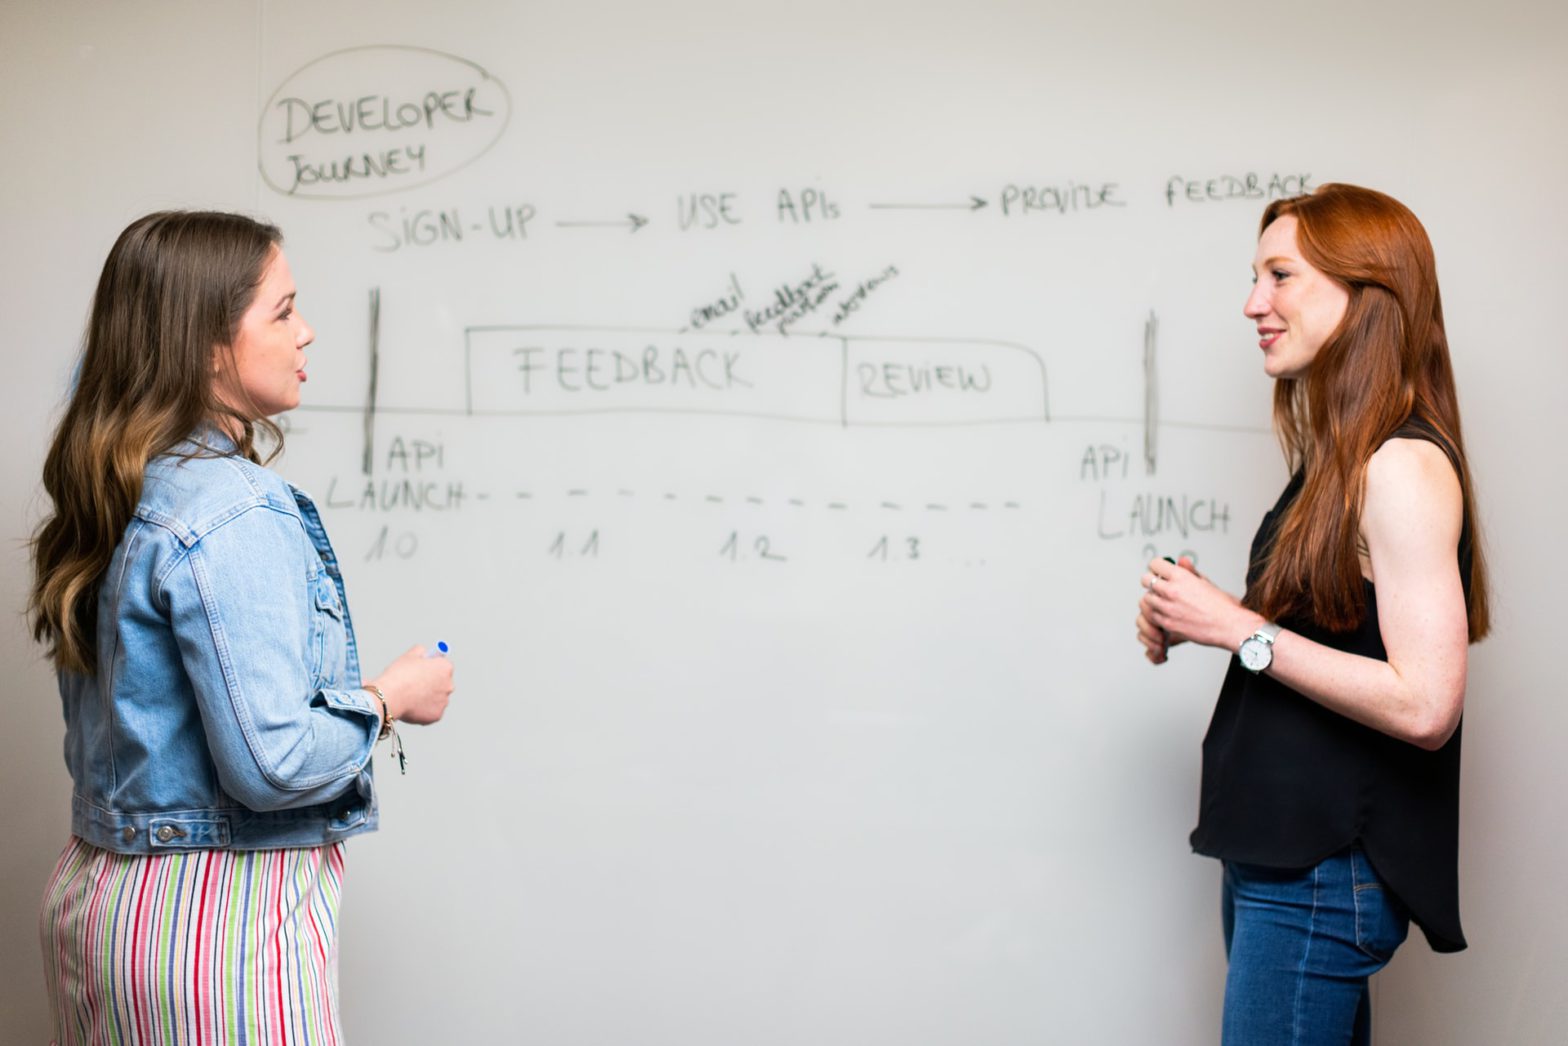 Two female engineers working at a whiteboard